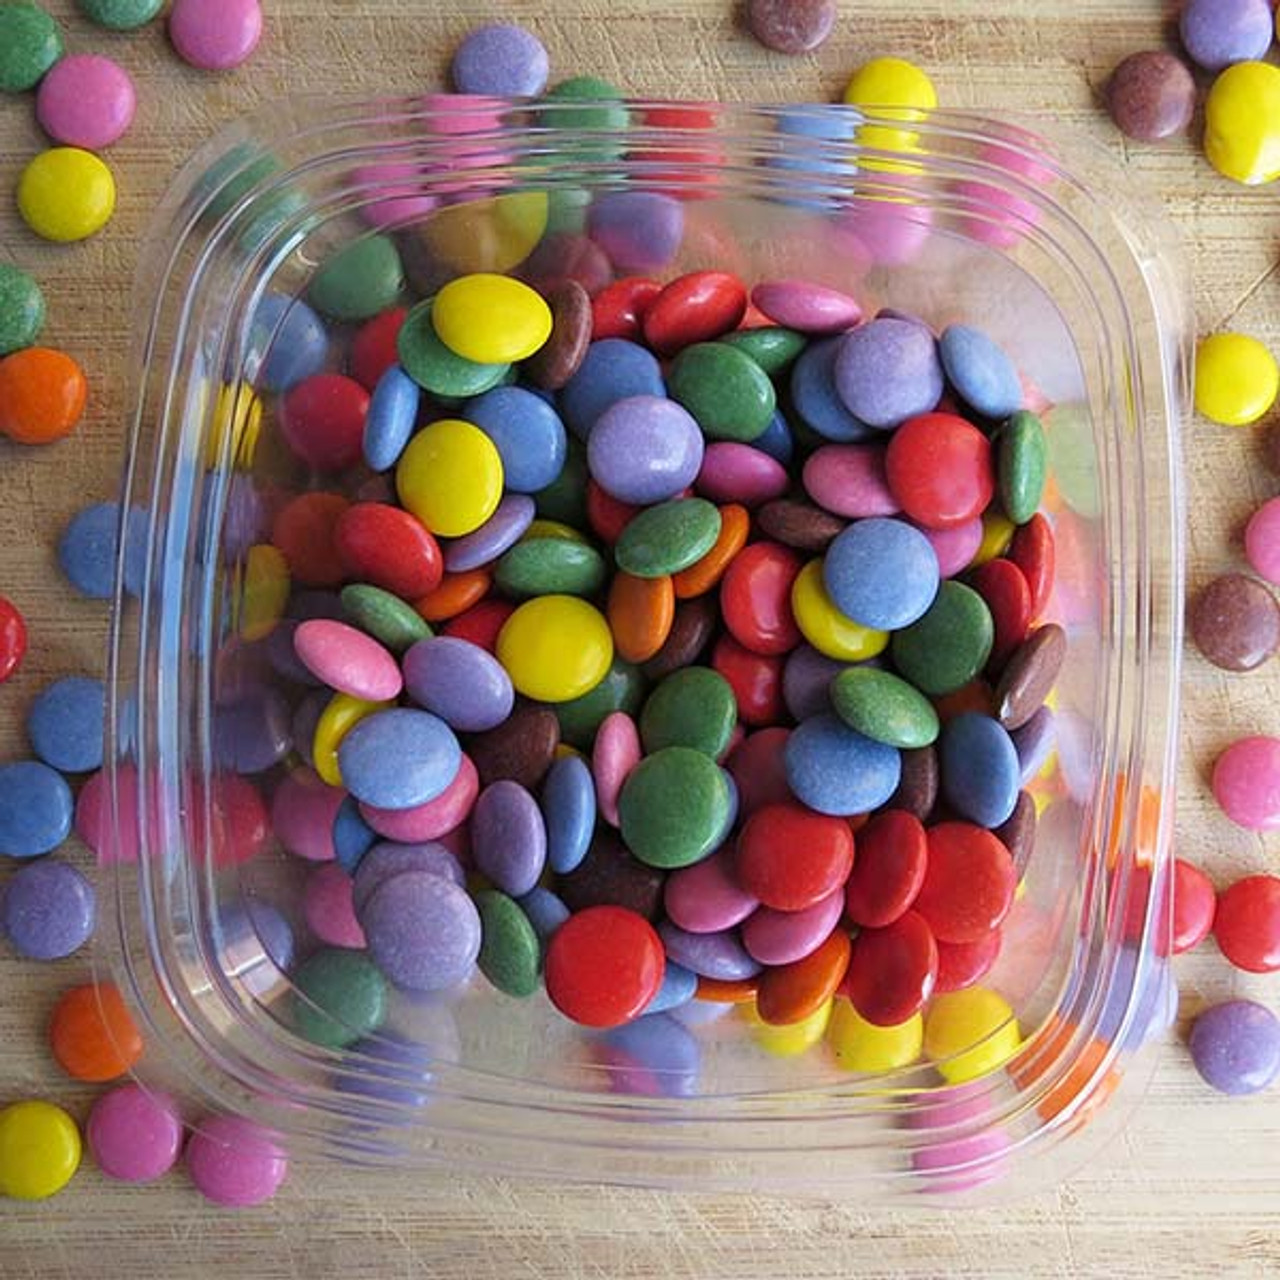 M&M'S Compostable Packaging